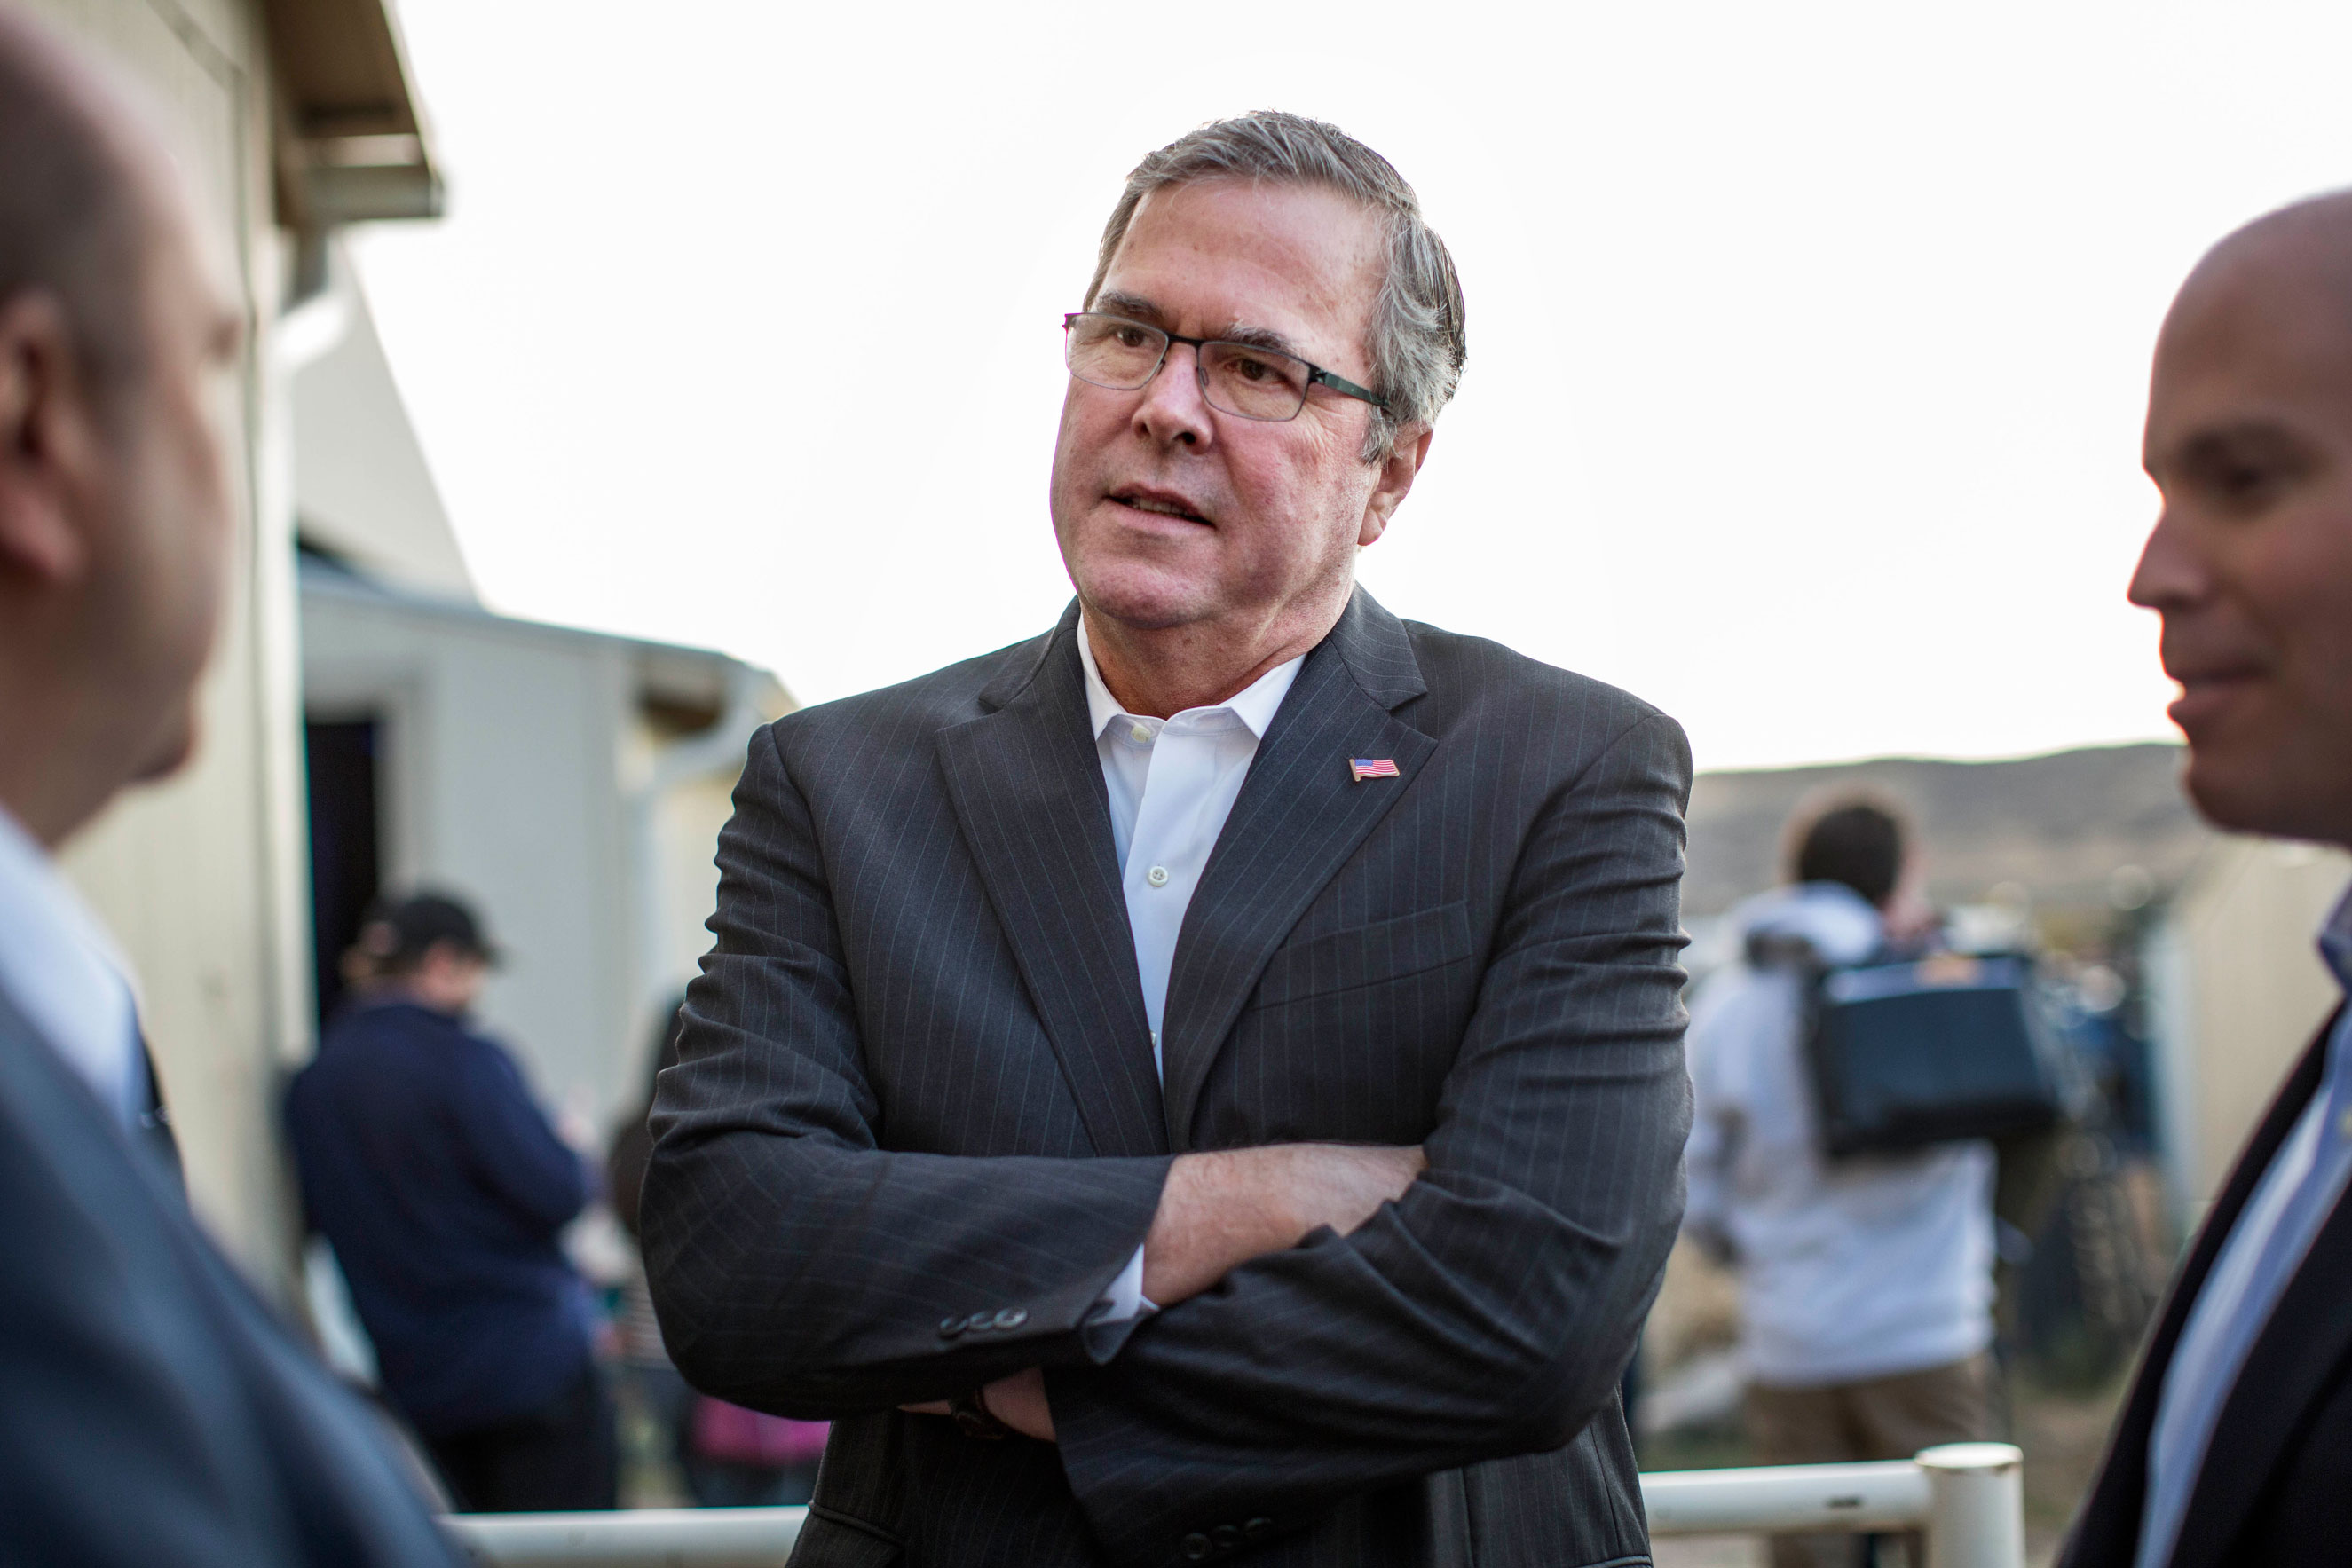 Jeb Bush at the Douglas County Fairgrounds in Castle Rock, Colo., on Oct. 29, 2014 (Melina Mara—The Washington Post/Getty Images)